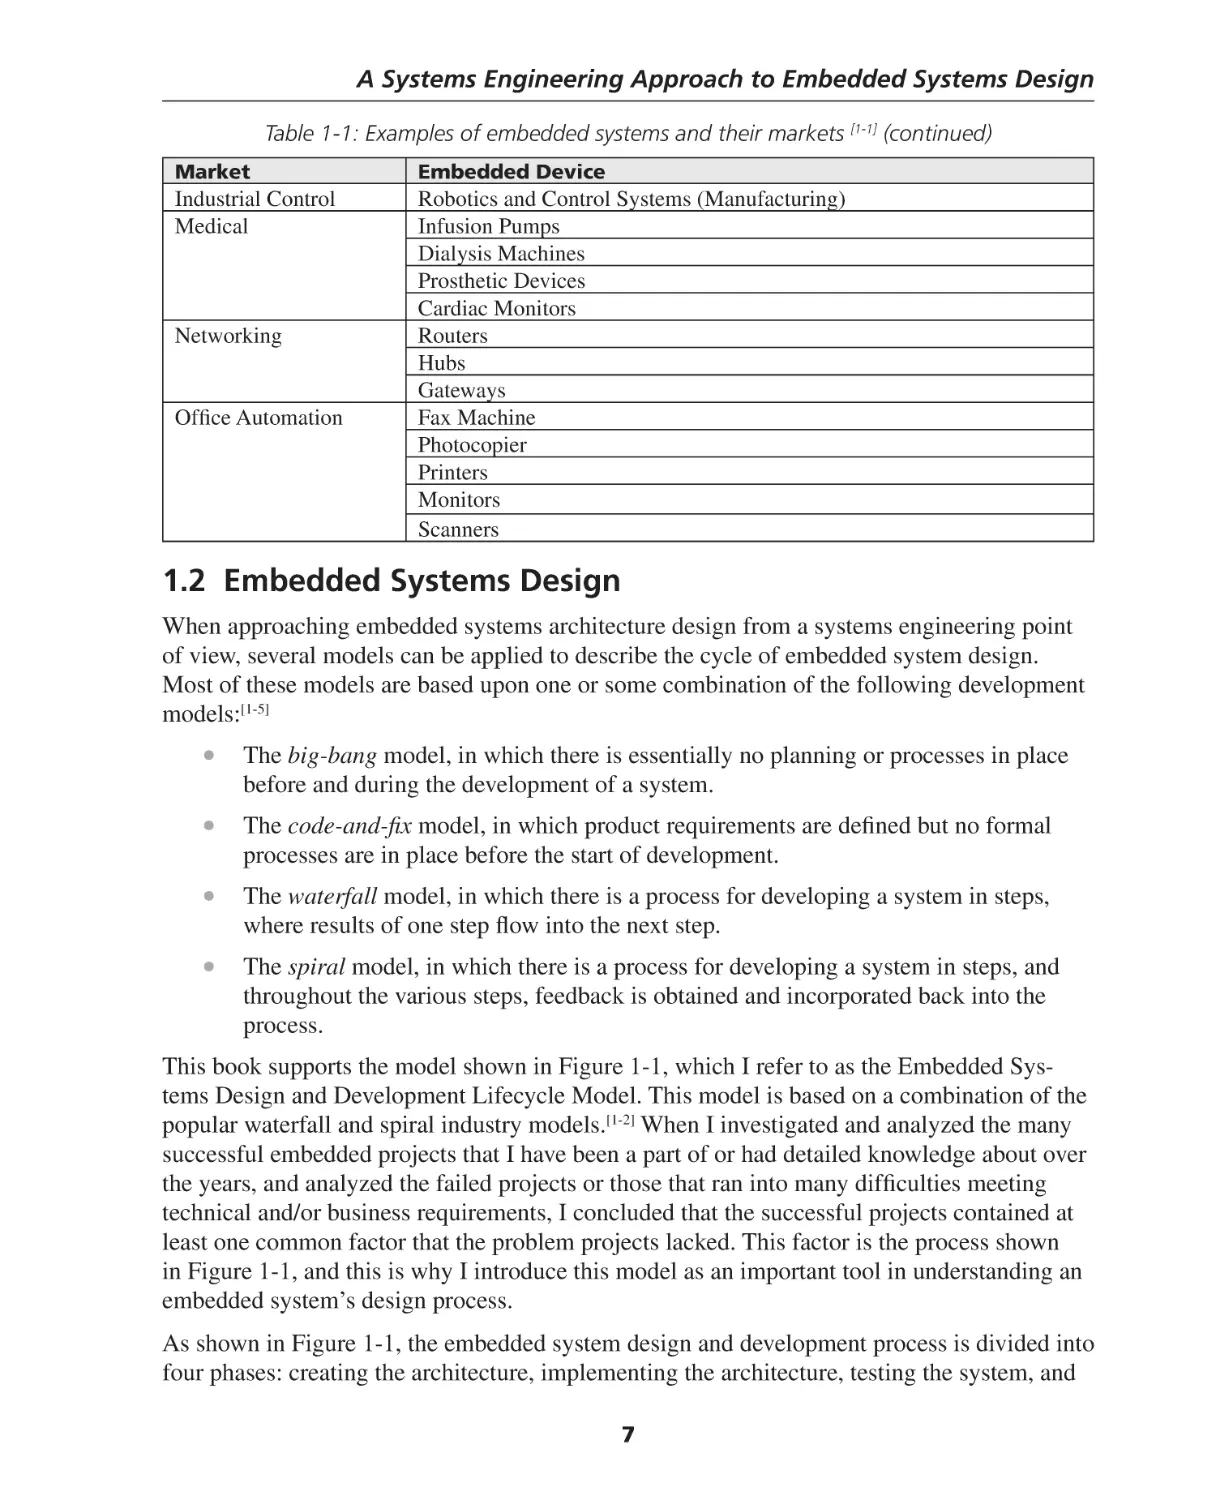 1.2 Embedded Systems Design